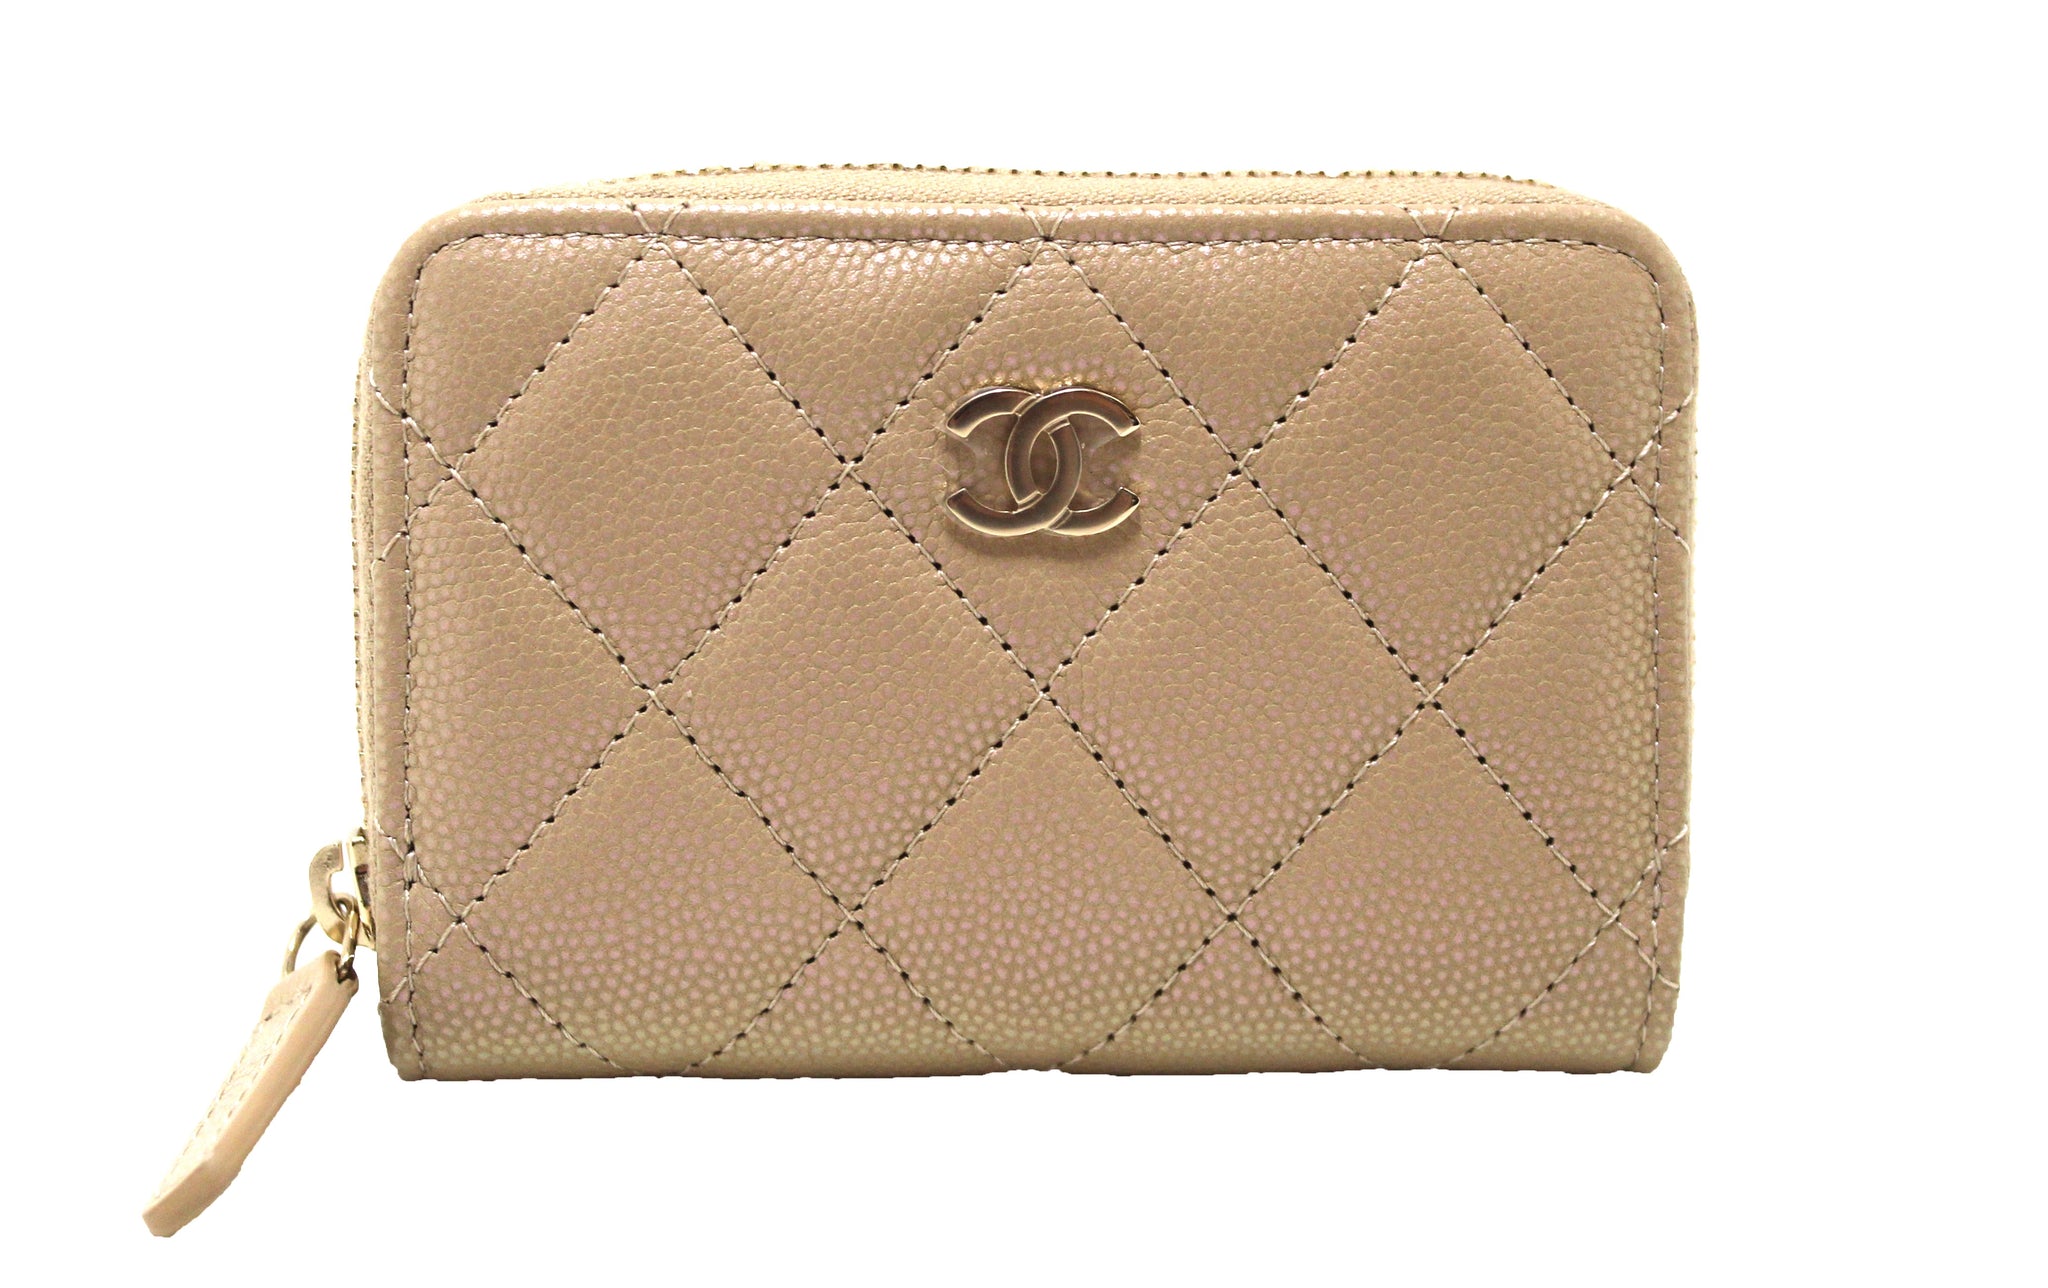 Chanel Yellow Quilted Iridescent Calfskin Leather Gusset Zip Wallet